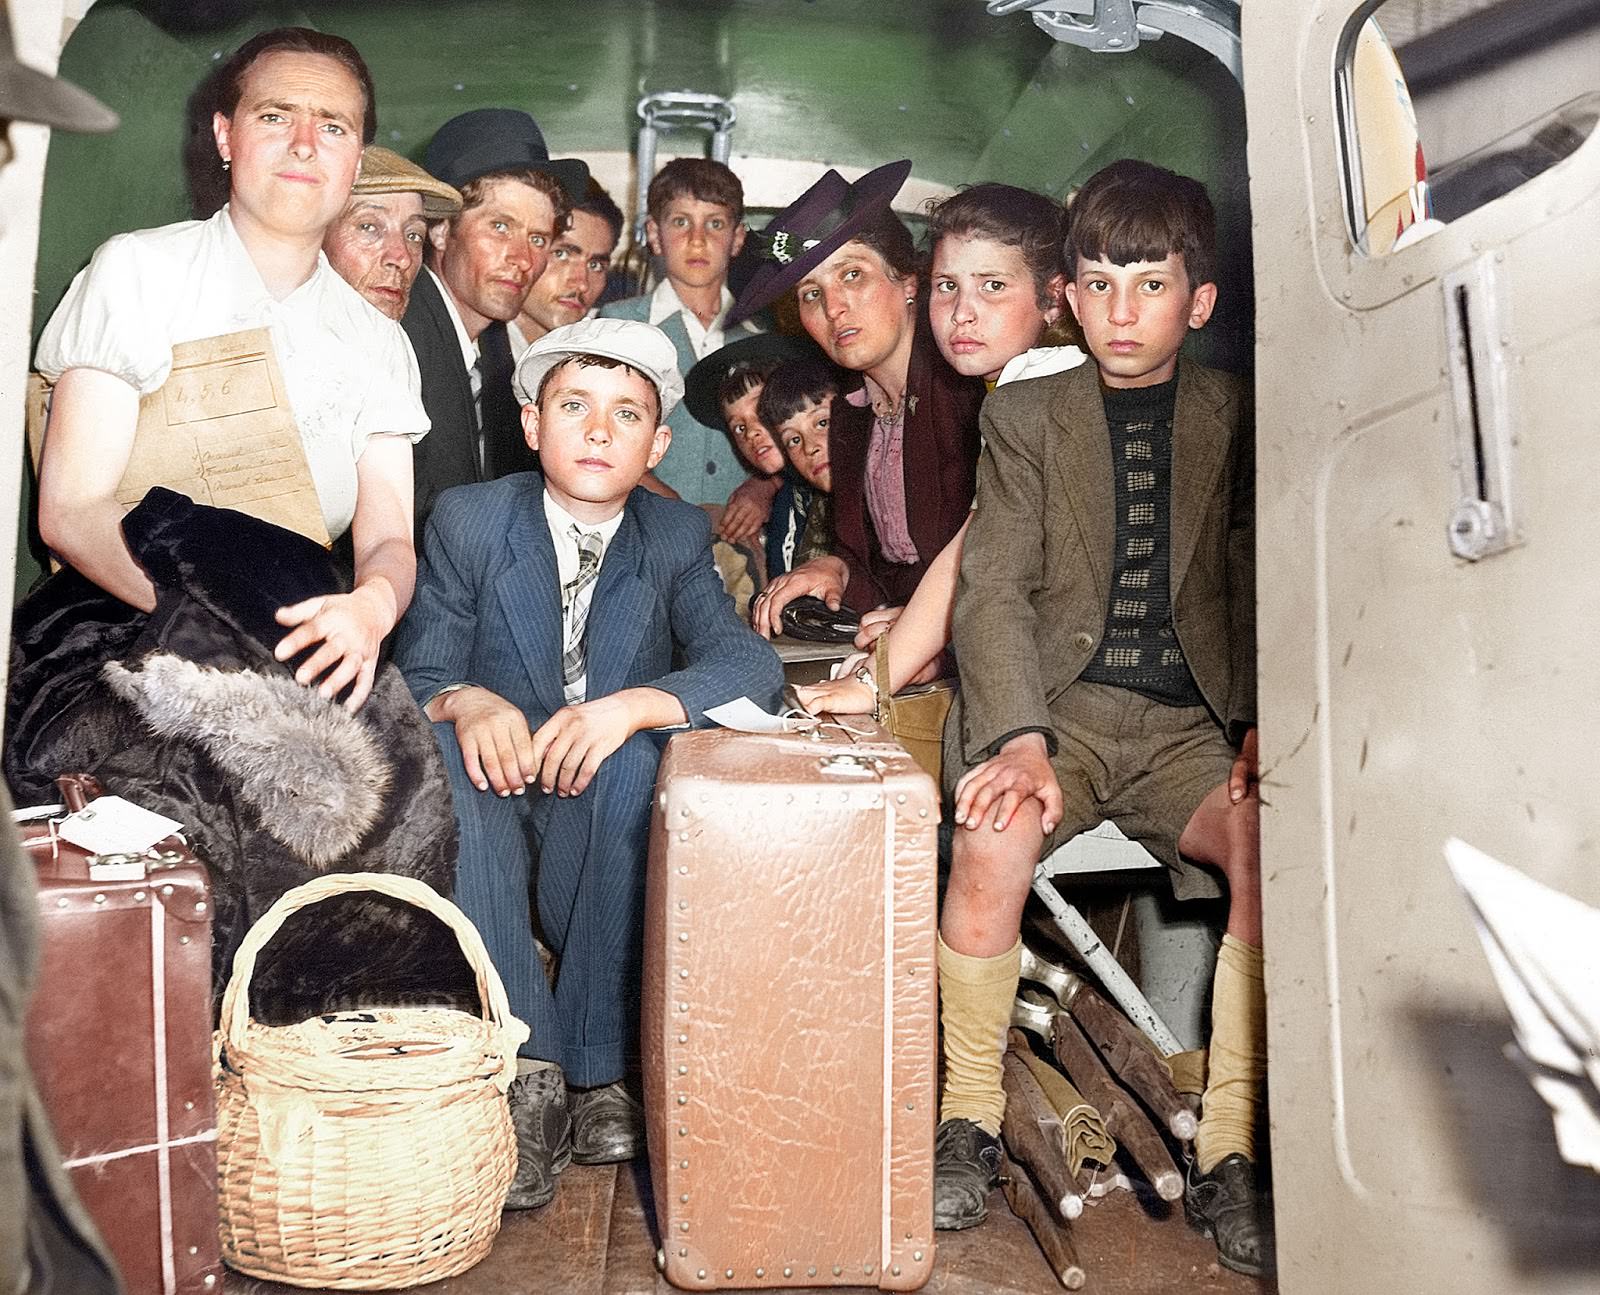 Group of passengers from the Portuguese ship Serpa Pinto, which was stopped by a German submarine and ordered abandoned off Bermuda, are shown after their arrival in Philadelphia, May 31, 1944. The U-boat officers abandoned plans to sink the vessel and permitted the passengers to re-board her after